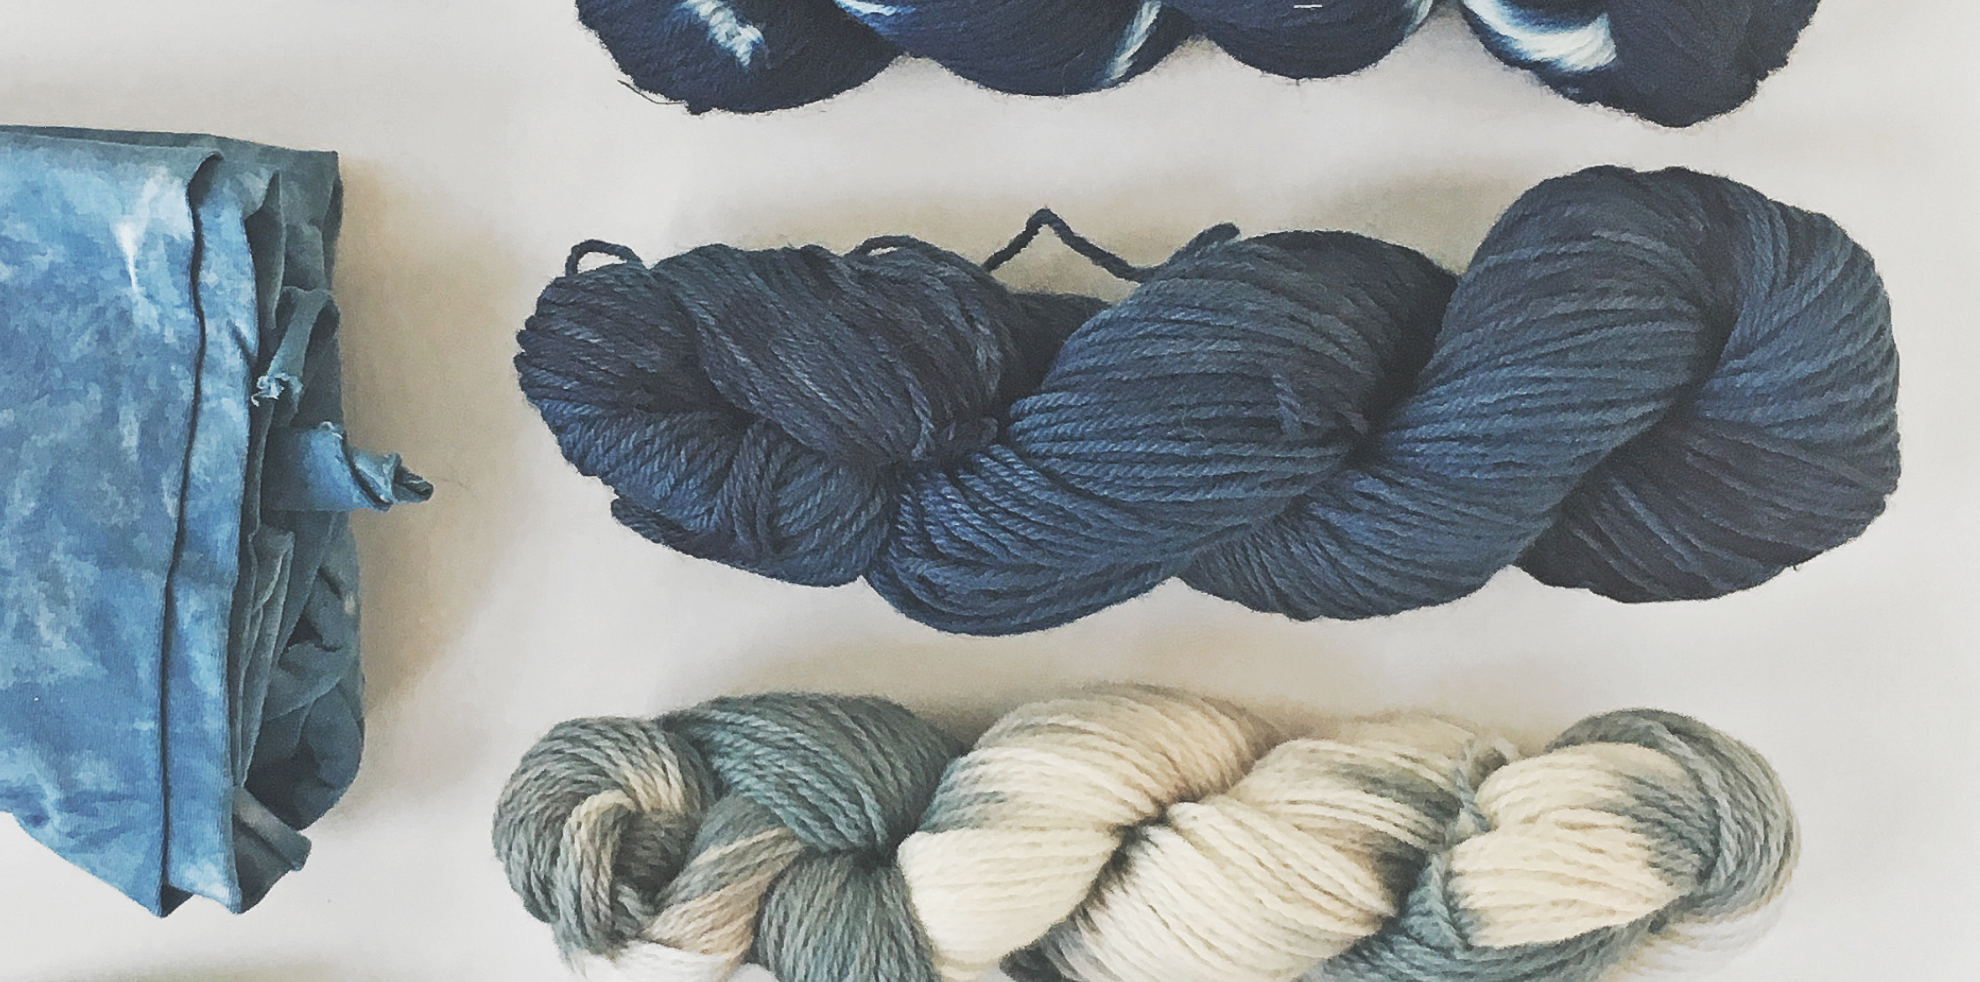 A Colour to Dye For: Dyeing with Indigo